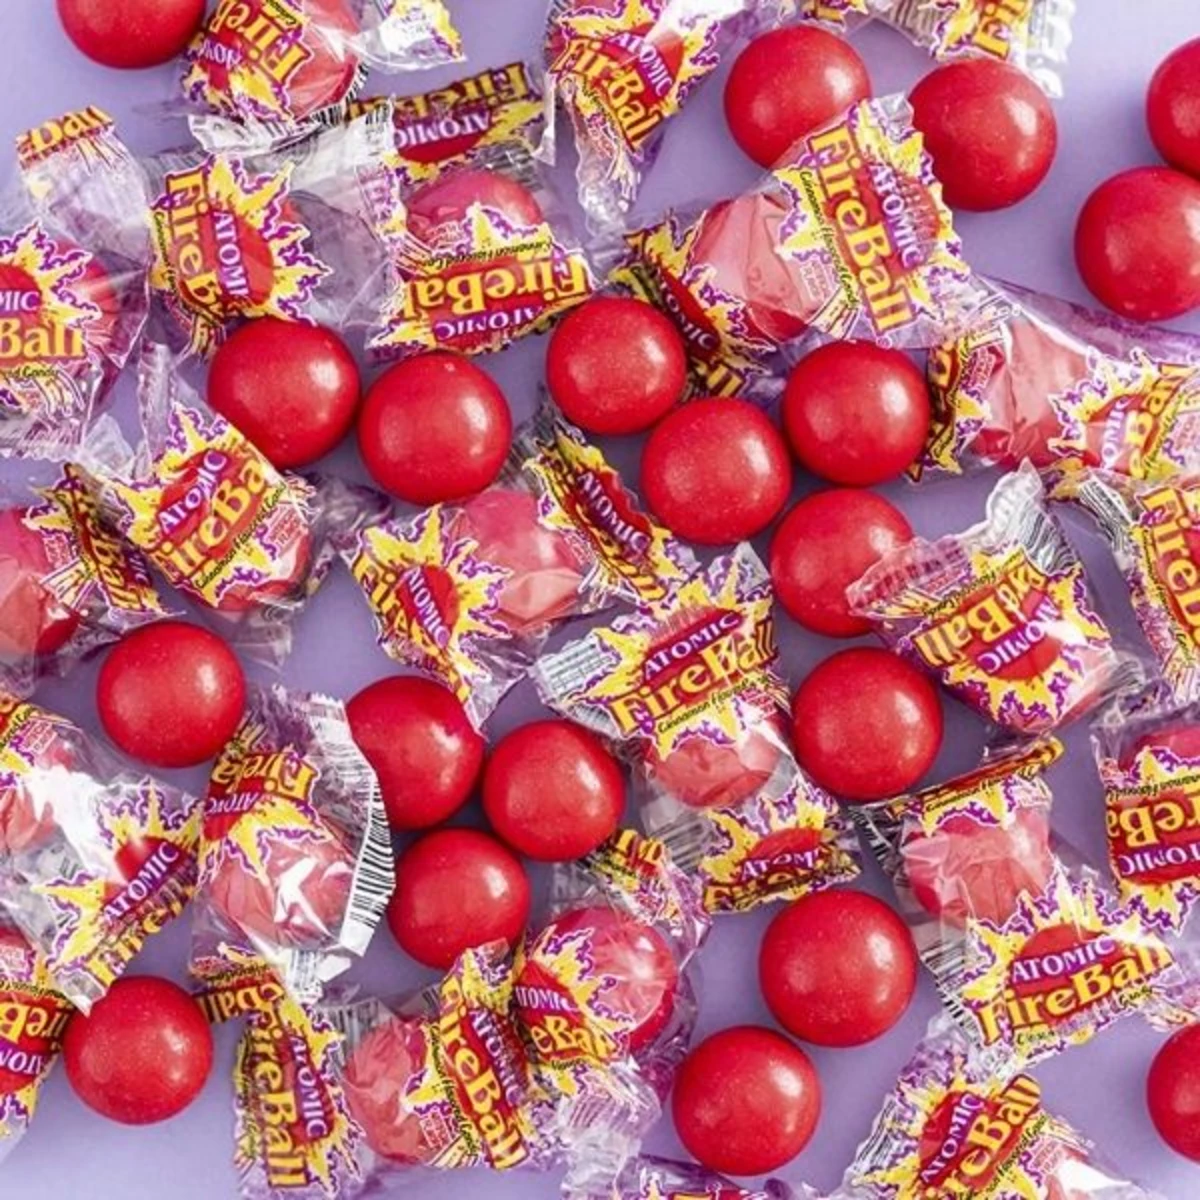 The 10 Best Penny Candies From the '70s and '80s